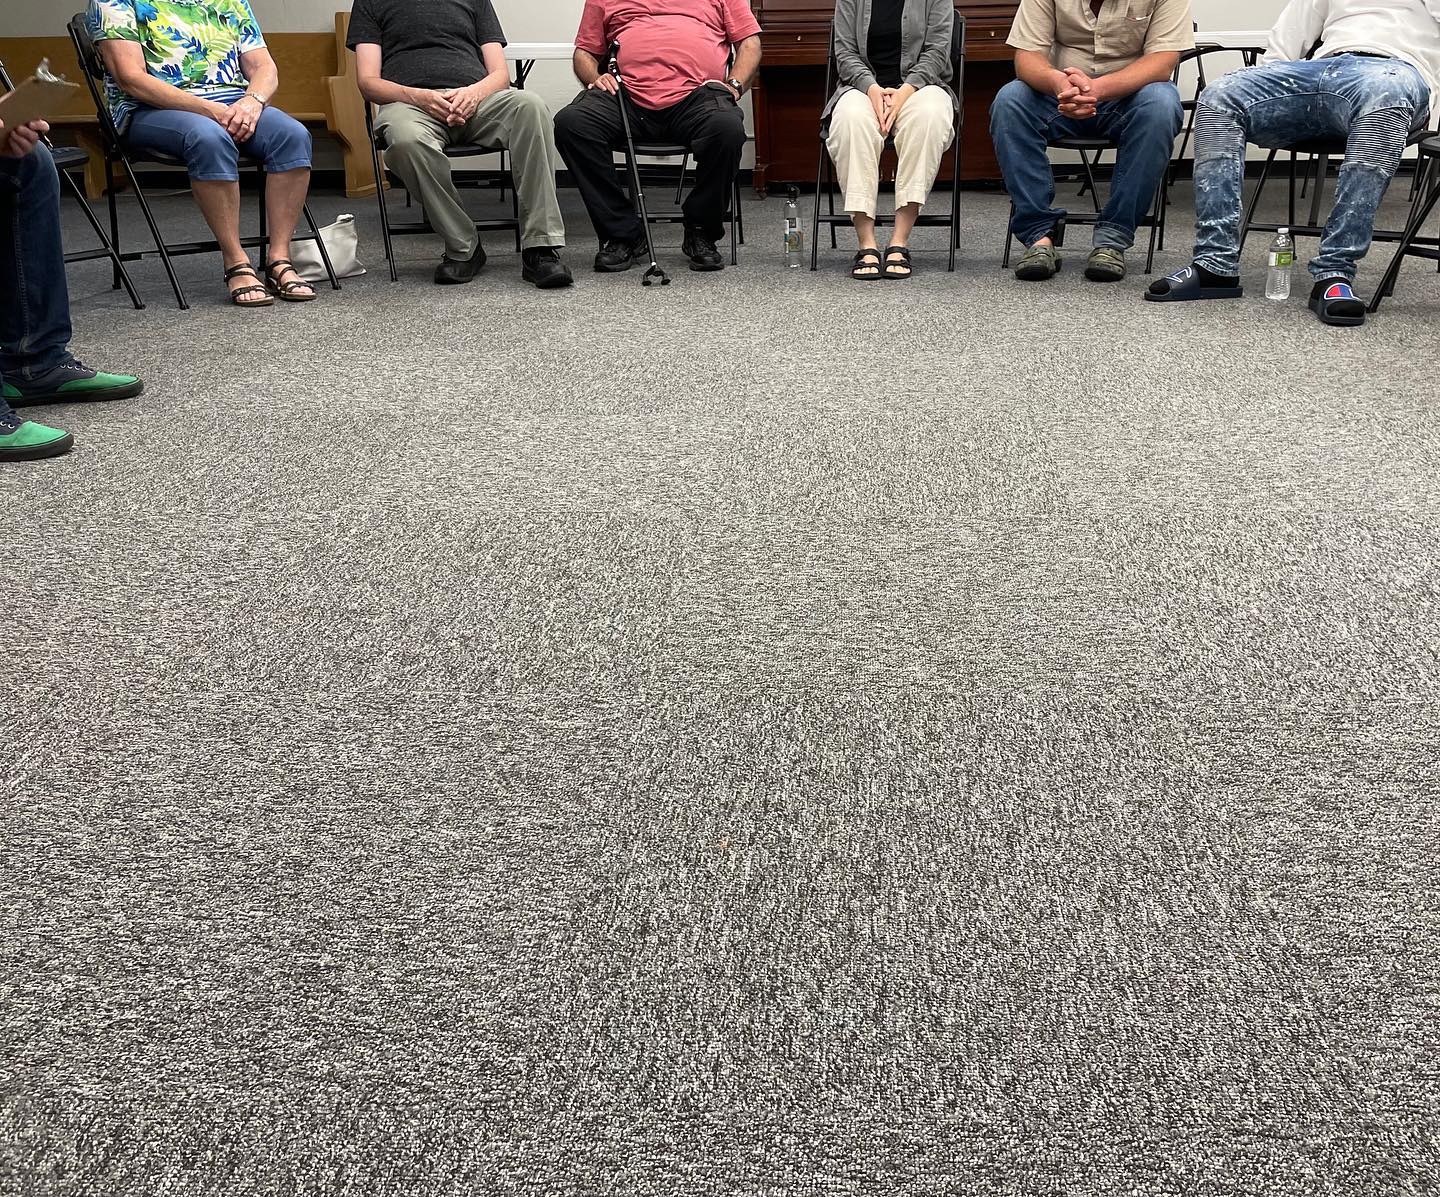 Every Thursday night from 6:30-8pm Inside Out hosts our weekly community meeting for individuals returning to the community after incarceration. These meetings are a safe and judgement free zone where individuals can come together to get support in their reentry and provide peer support to others. 

#reentry #reentrymatters #formerlyincarcerated #returningcitizens #reentrycommunity